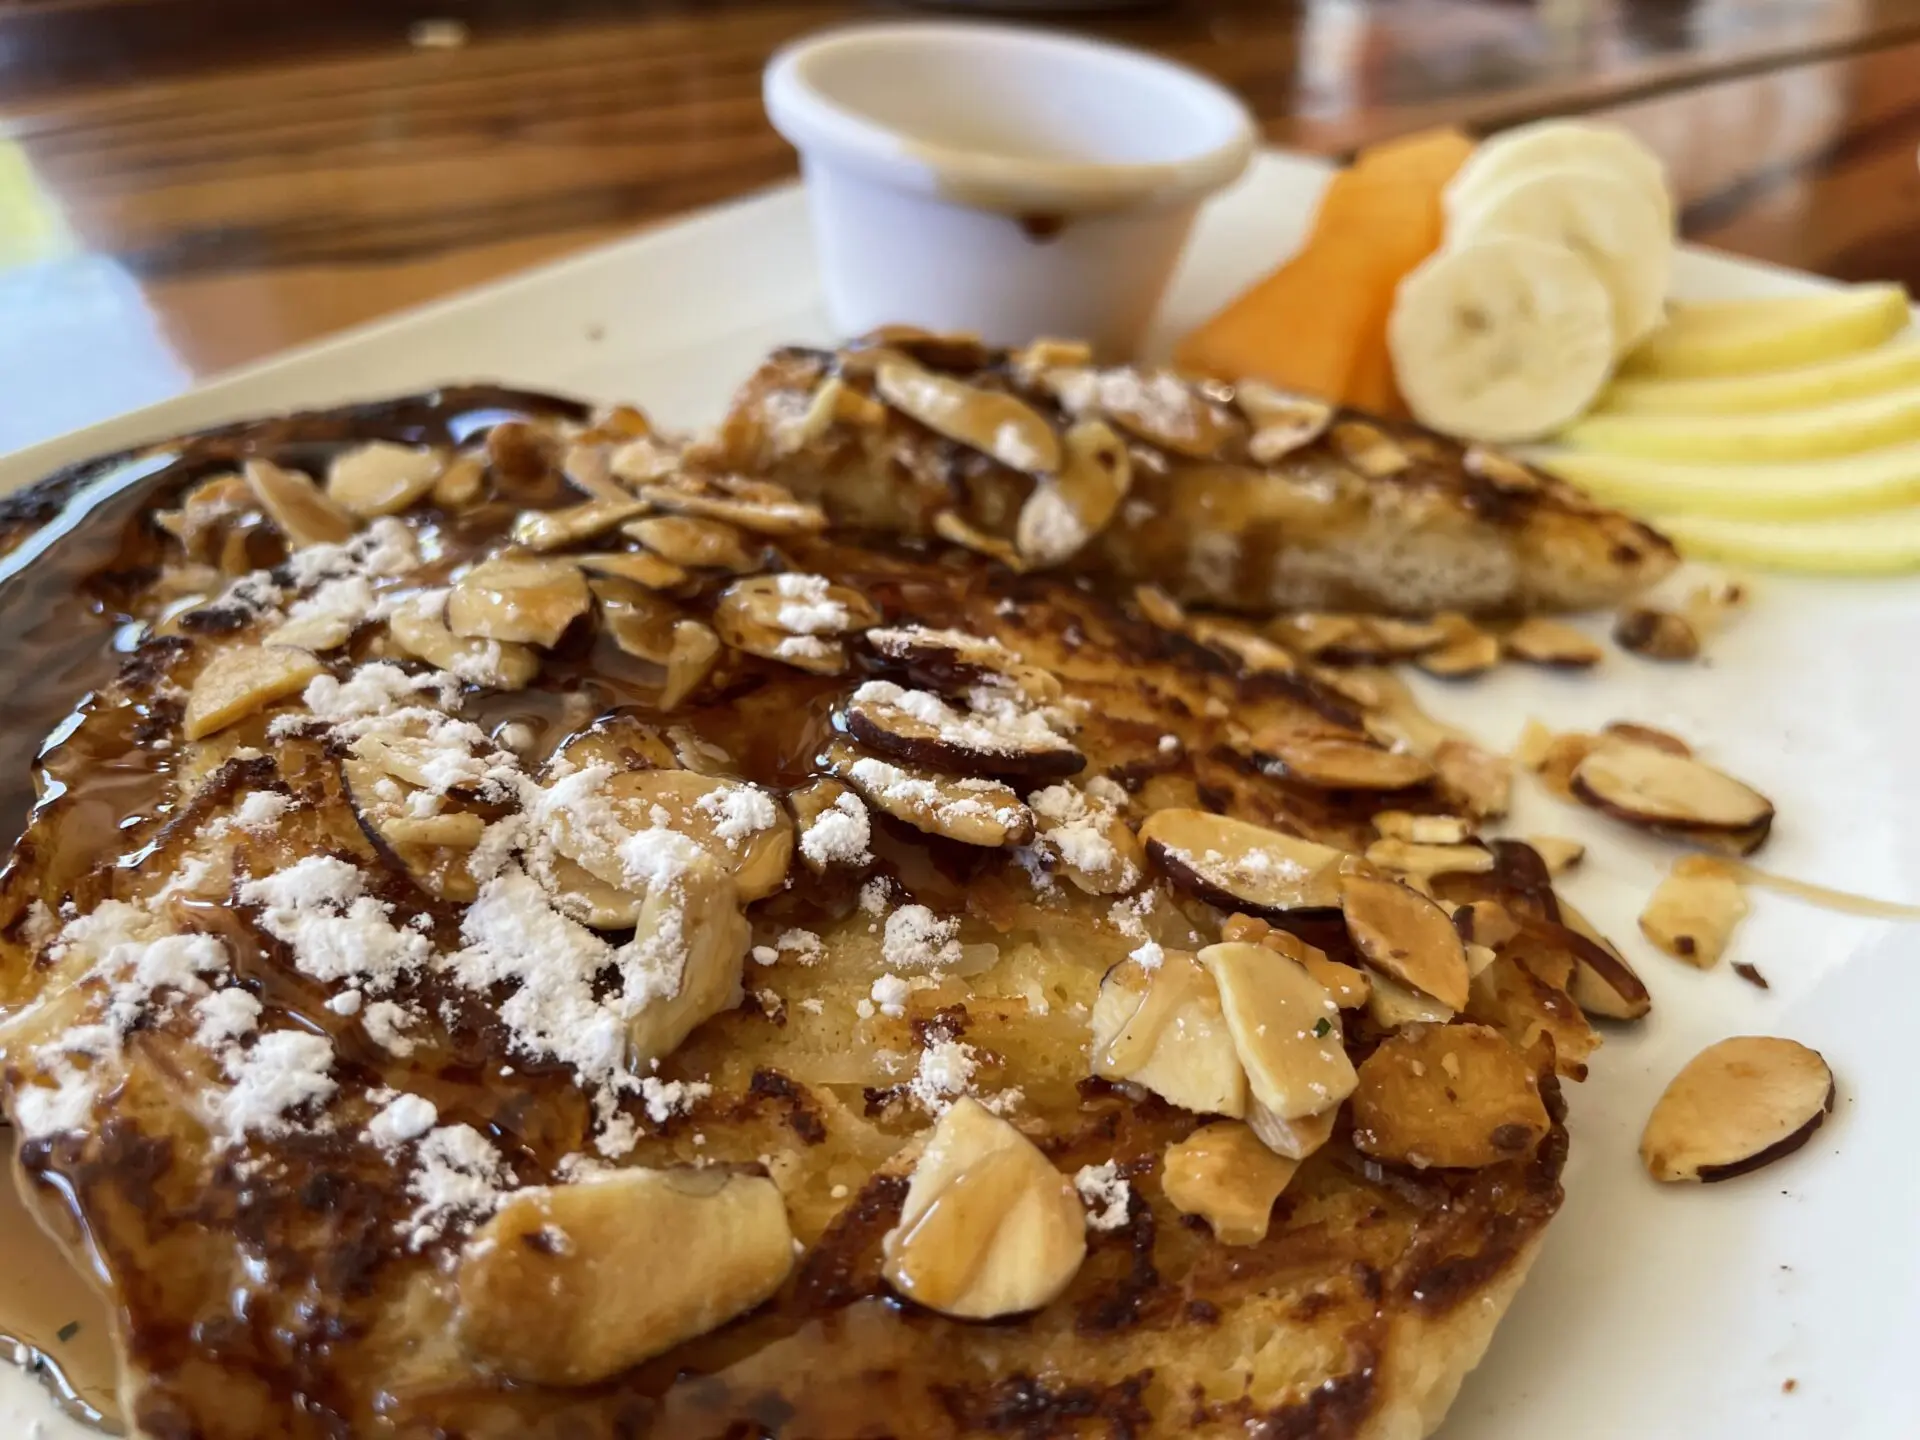 A plate of french toast with almonds and fruit.